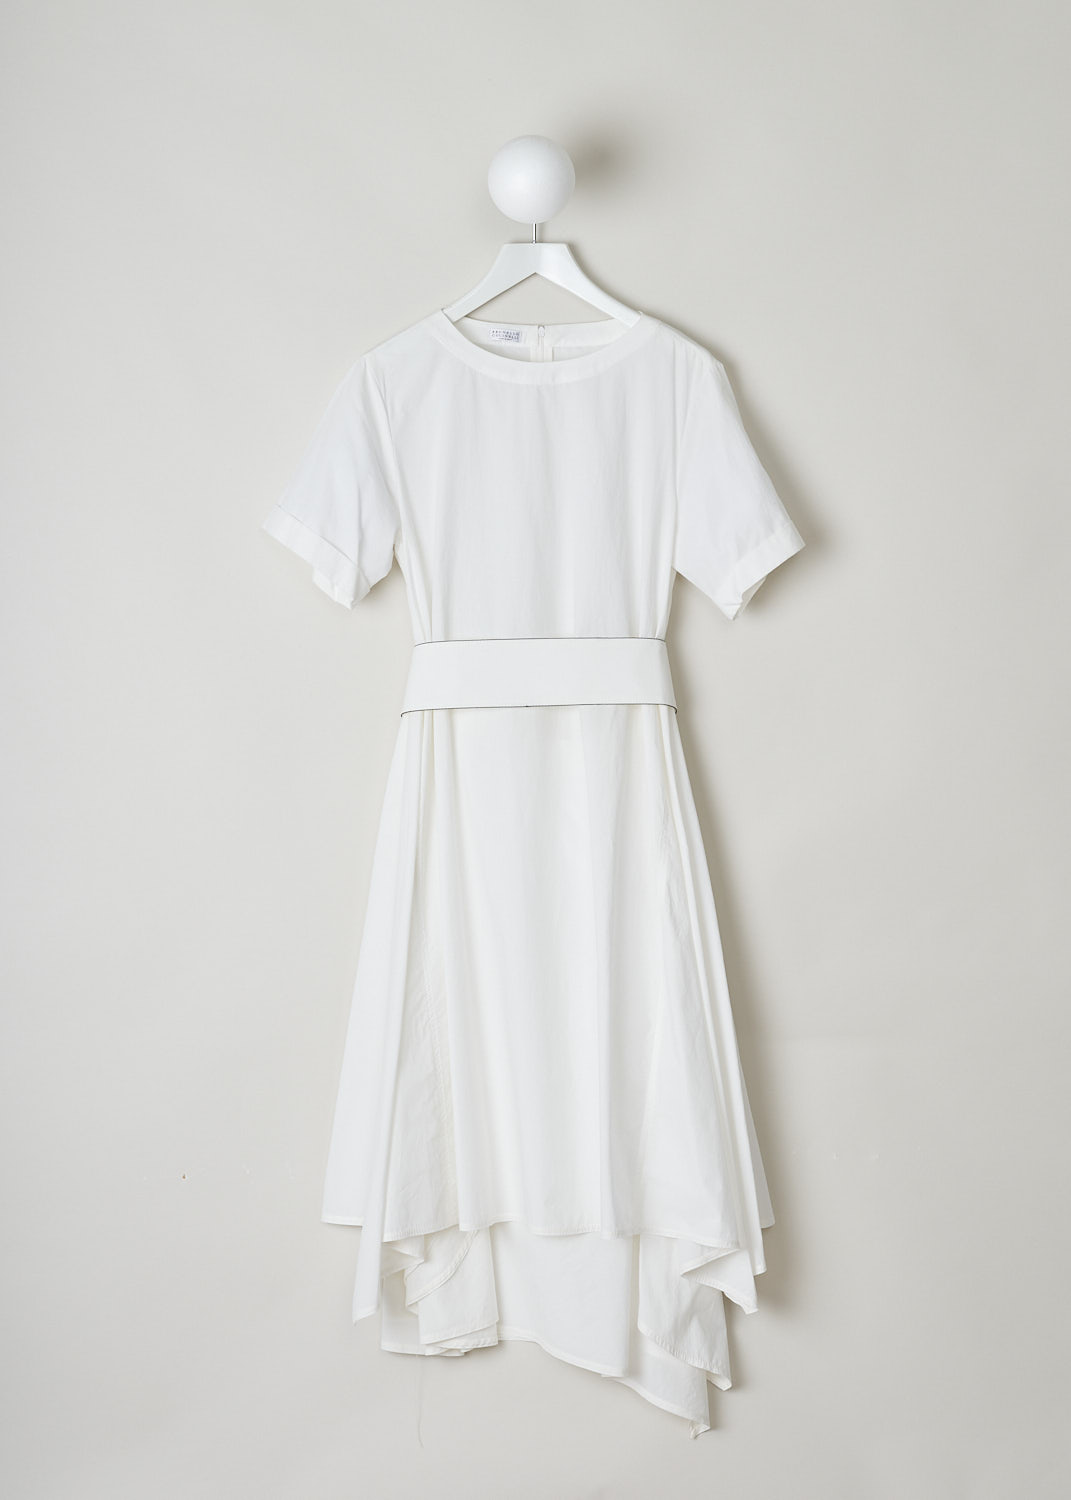 BRUNELLO CUCINELLI, WHITE MIDI DRESS WITH A HIGH-LOW SKIRT, MH127A4534_C600, White, Front, This white midi dress has a round neckline and short sleeves with folded cuffs. The dress has a flared high-low skirt, meaning the hemline is shorter at the front and longer at the back. The broad fabric belt has a contrasting black monili trim and a D-ring belt buckle. The dress comes with a detachable underskirt with a broad elasticated waistband. The underskirt is attached with two buttons. In the back, a concealed centre zip functions as the closure option. 
